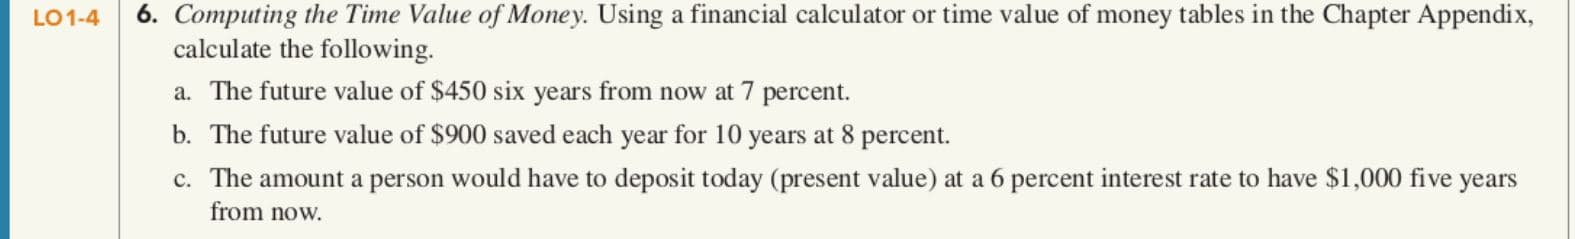 6. Computing the Time Value of Money. Using a financial calculator or time value of money tables in the Chapter Appendix,
calculate the following.
a. The future value of $450 six years from now at 7 percent.
b. The future value of $900 saved each year for 10 years at 8 percent.
c. The amount a person would have to deposit today (present value) at a 6 percent interest rate to have $1,000 five years
LO1-4
from now.
